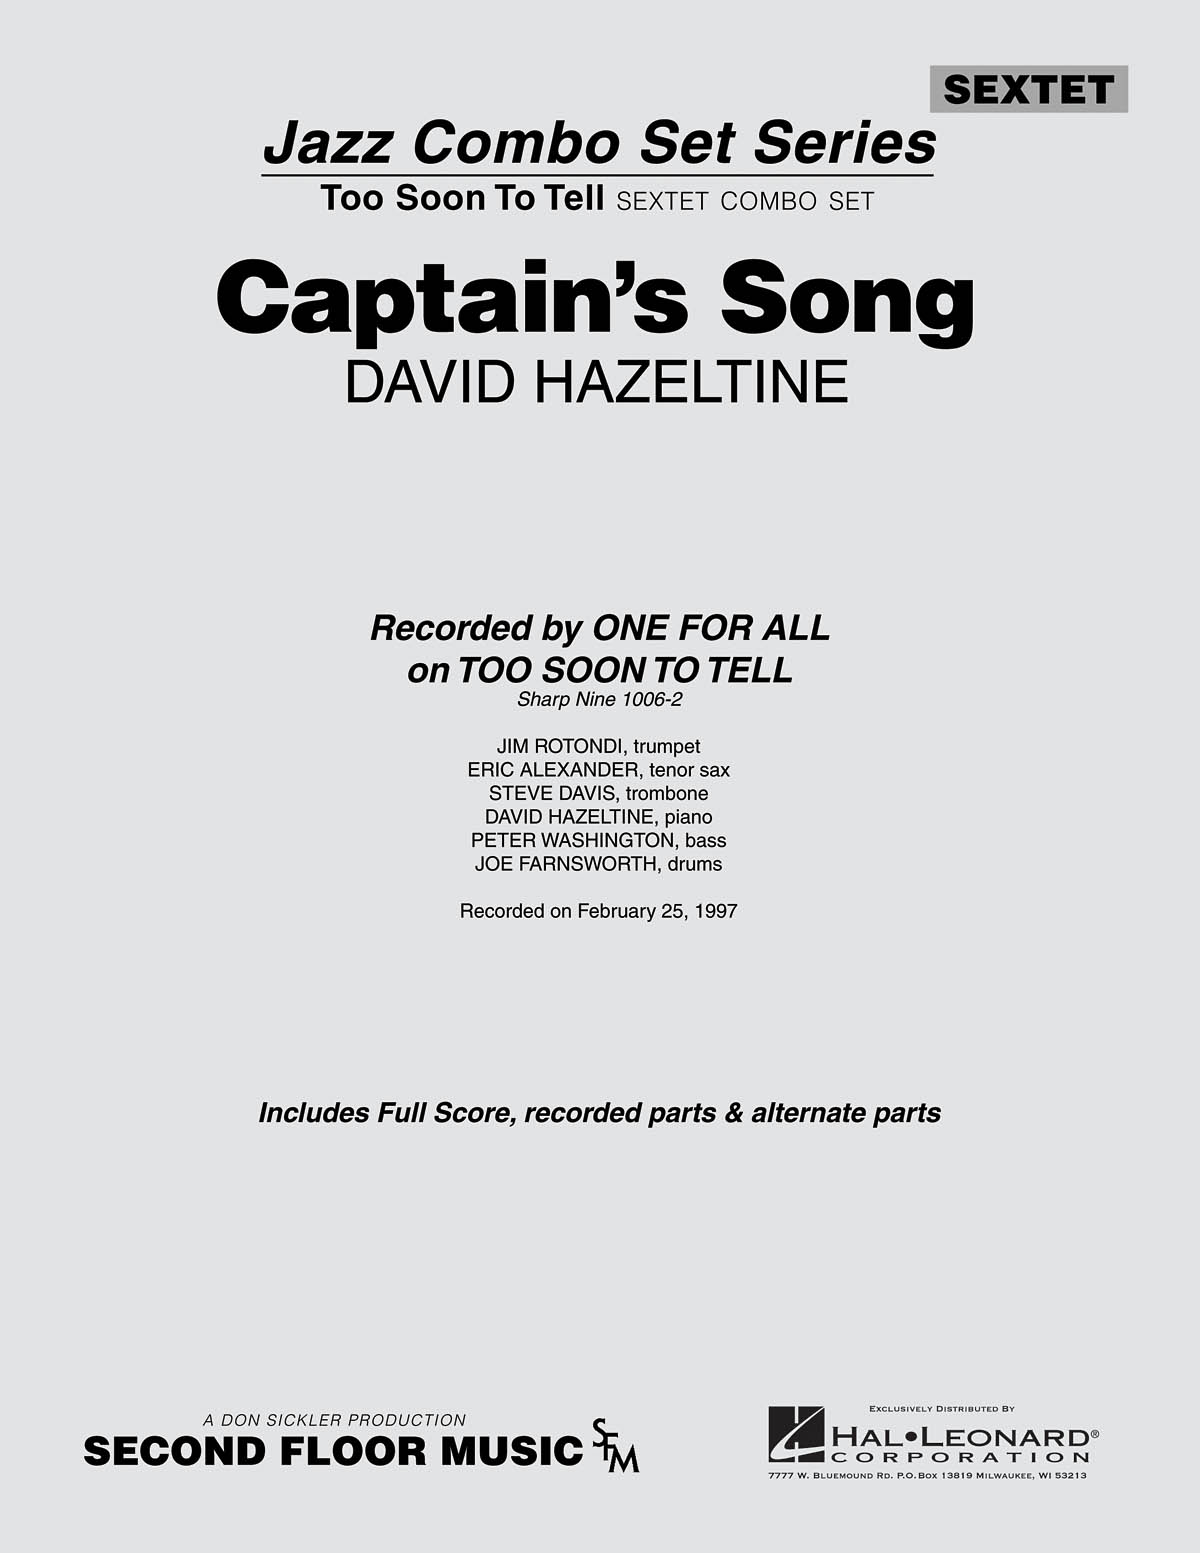 Captain’s Song(from the ALL fuer ONE Sextet Combo Series)